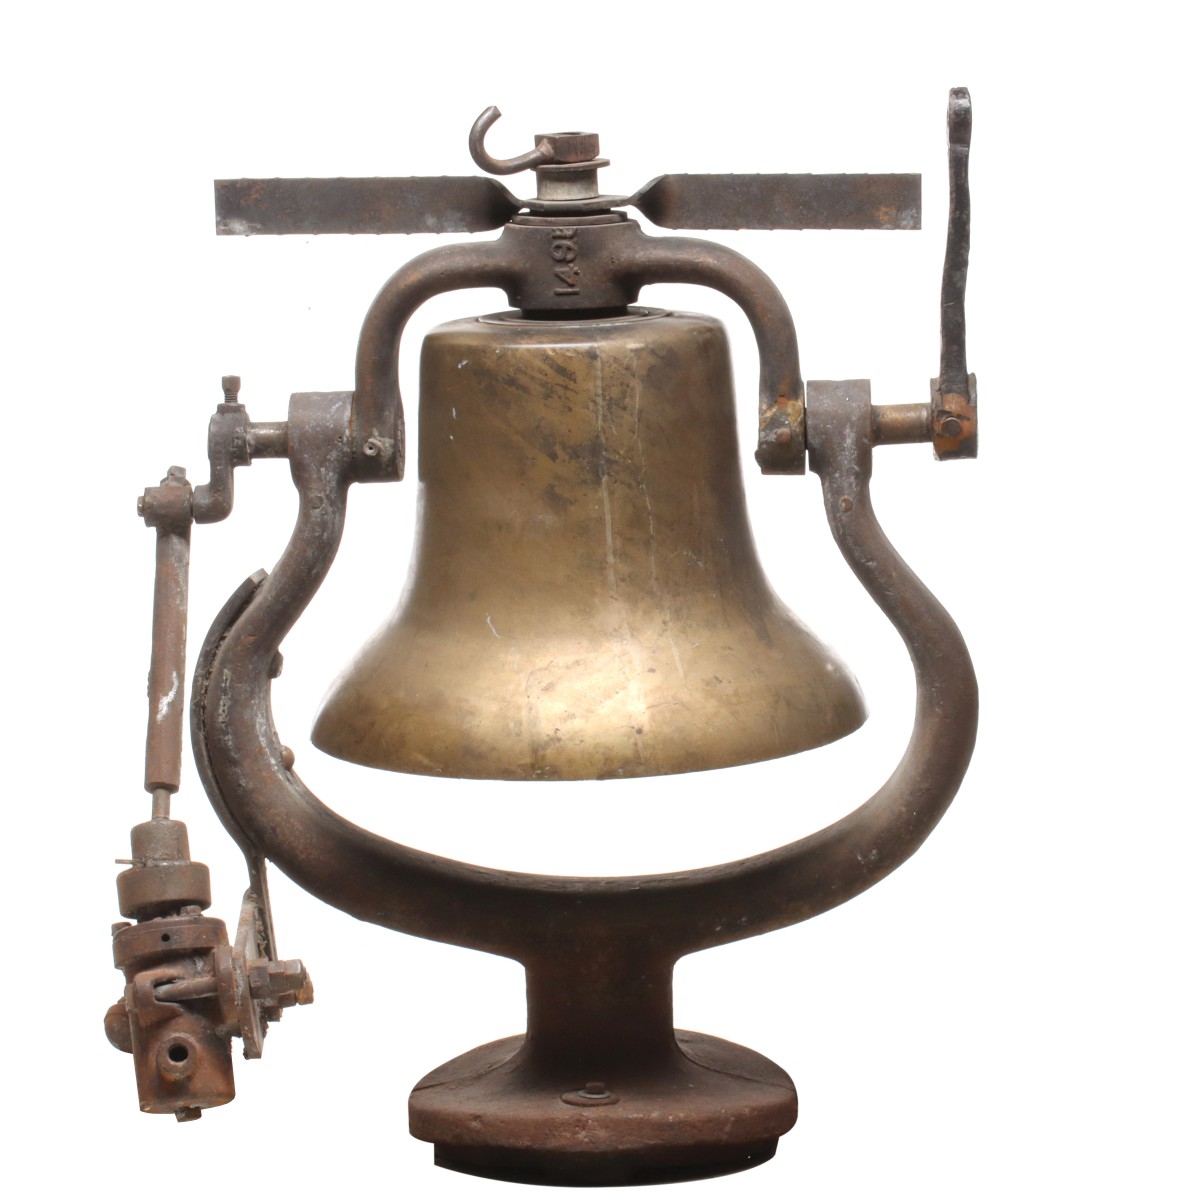 A BRONZE AND IRON LOCOMOTIVE BELL ATTRIBUTED AT&SF